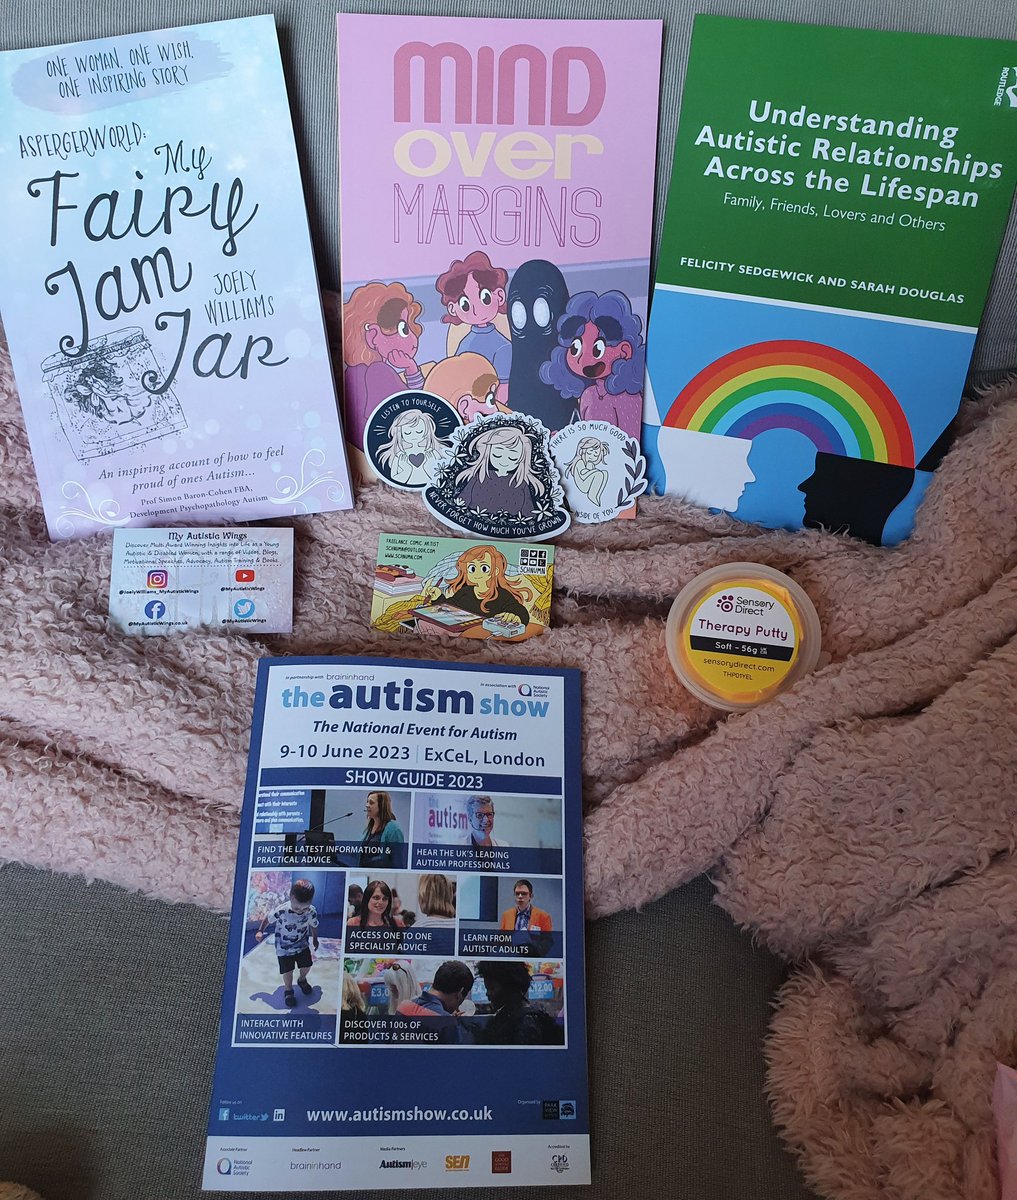 Had a lovely day at @TheAutismShow today. Had the absolute pleasure of meeting @MyAutisticWings, @Schnumn & @SedgewickF (& others!) as well. I discovered a bunch of useful resources from stalls & listened to three great talks too. So glad I pushed myself to go! 😊